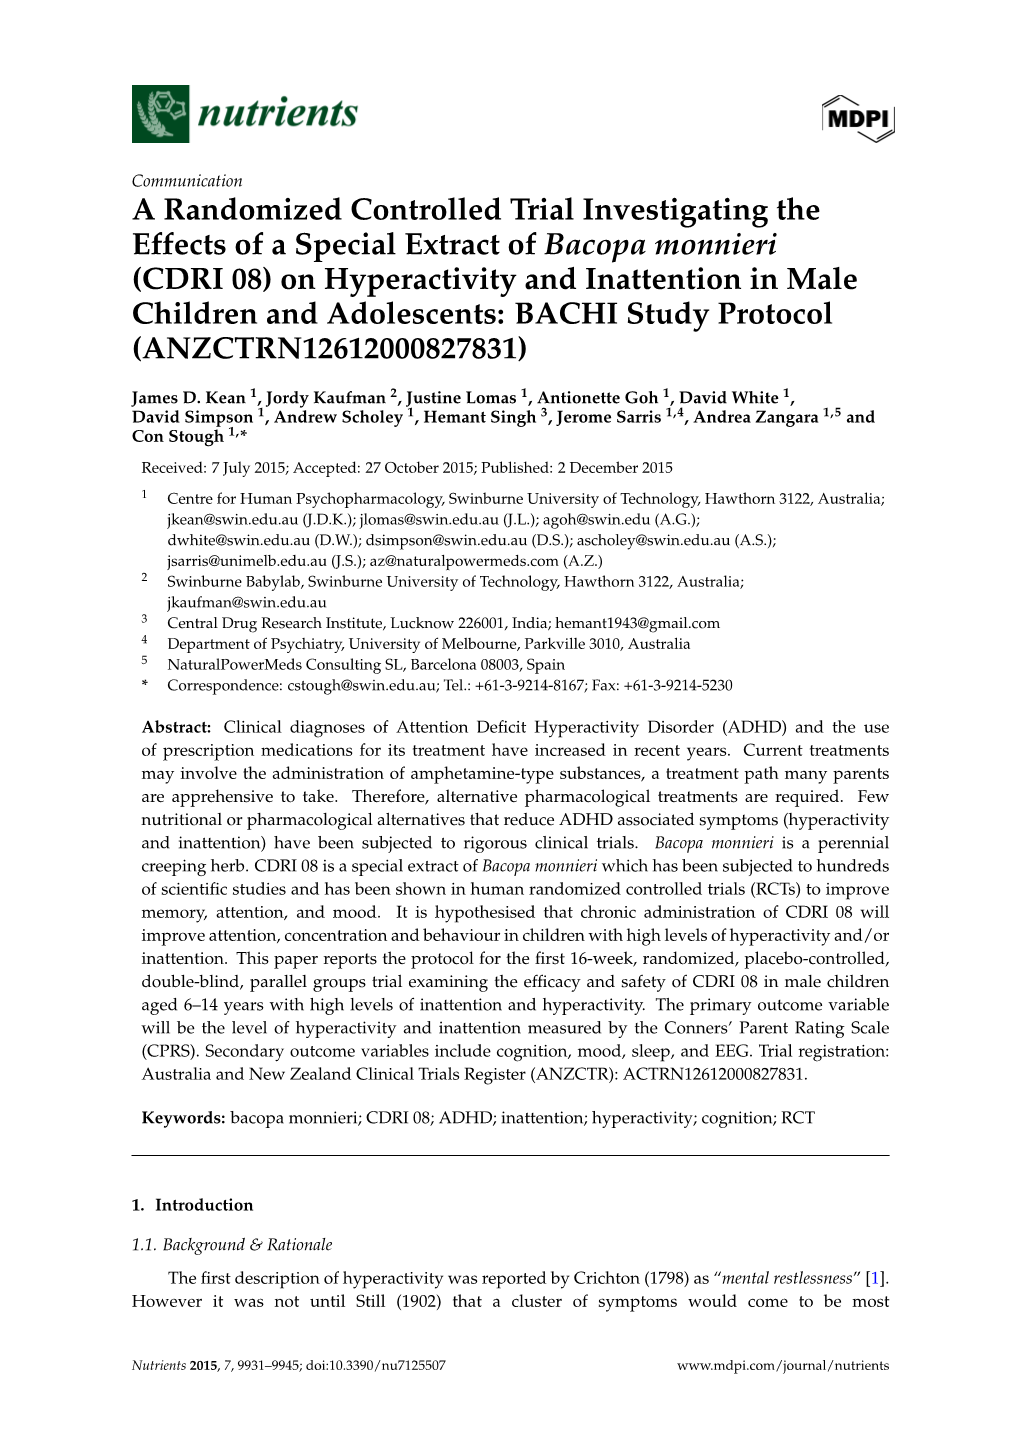 A Randomized Controlled Trial Investigating the Effects of a Special